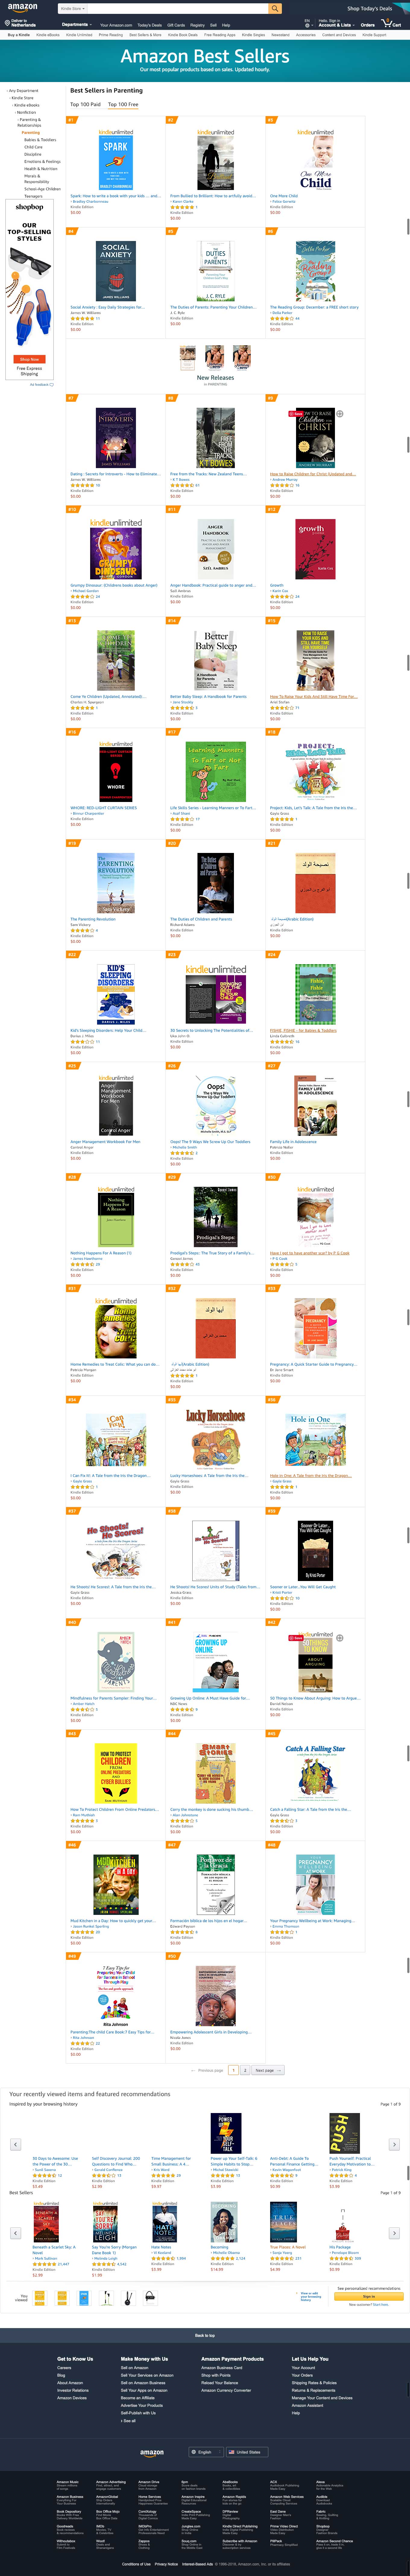 Spark has hit #1 in Parenting in Free Books